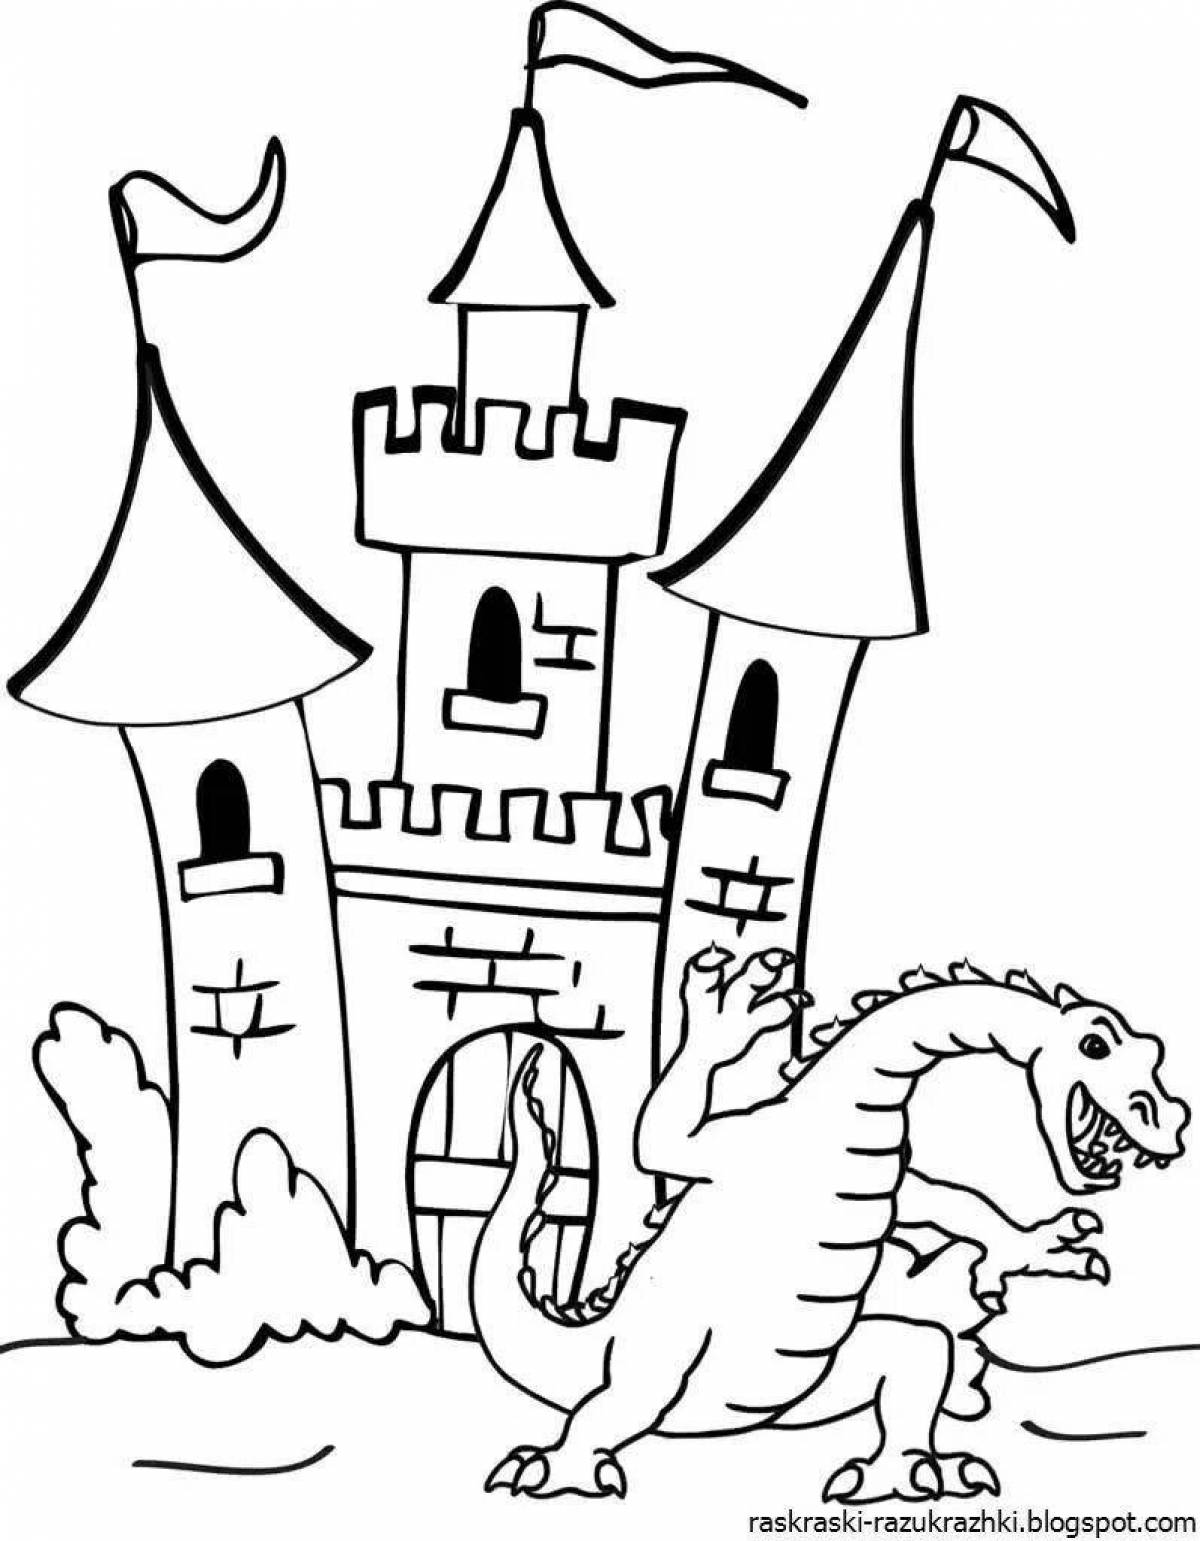 Great coloring for girls with houses and castles